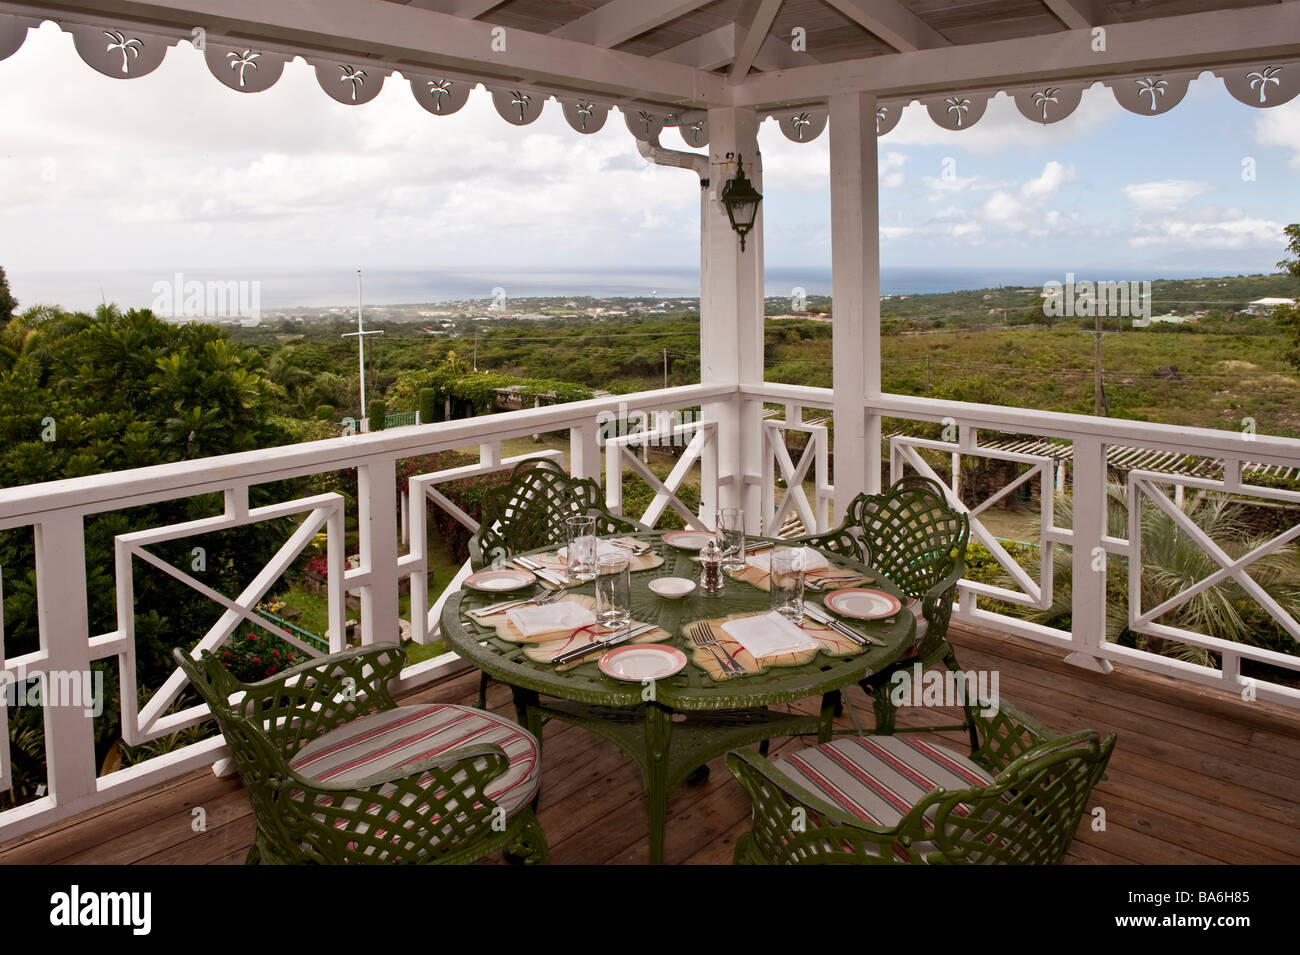 View from the verhanda of 1787 restaurant in the Botanical Gardens of Nevis Stock Photo